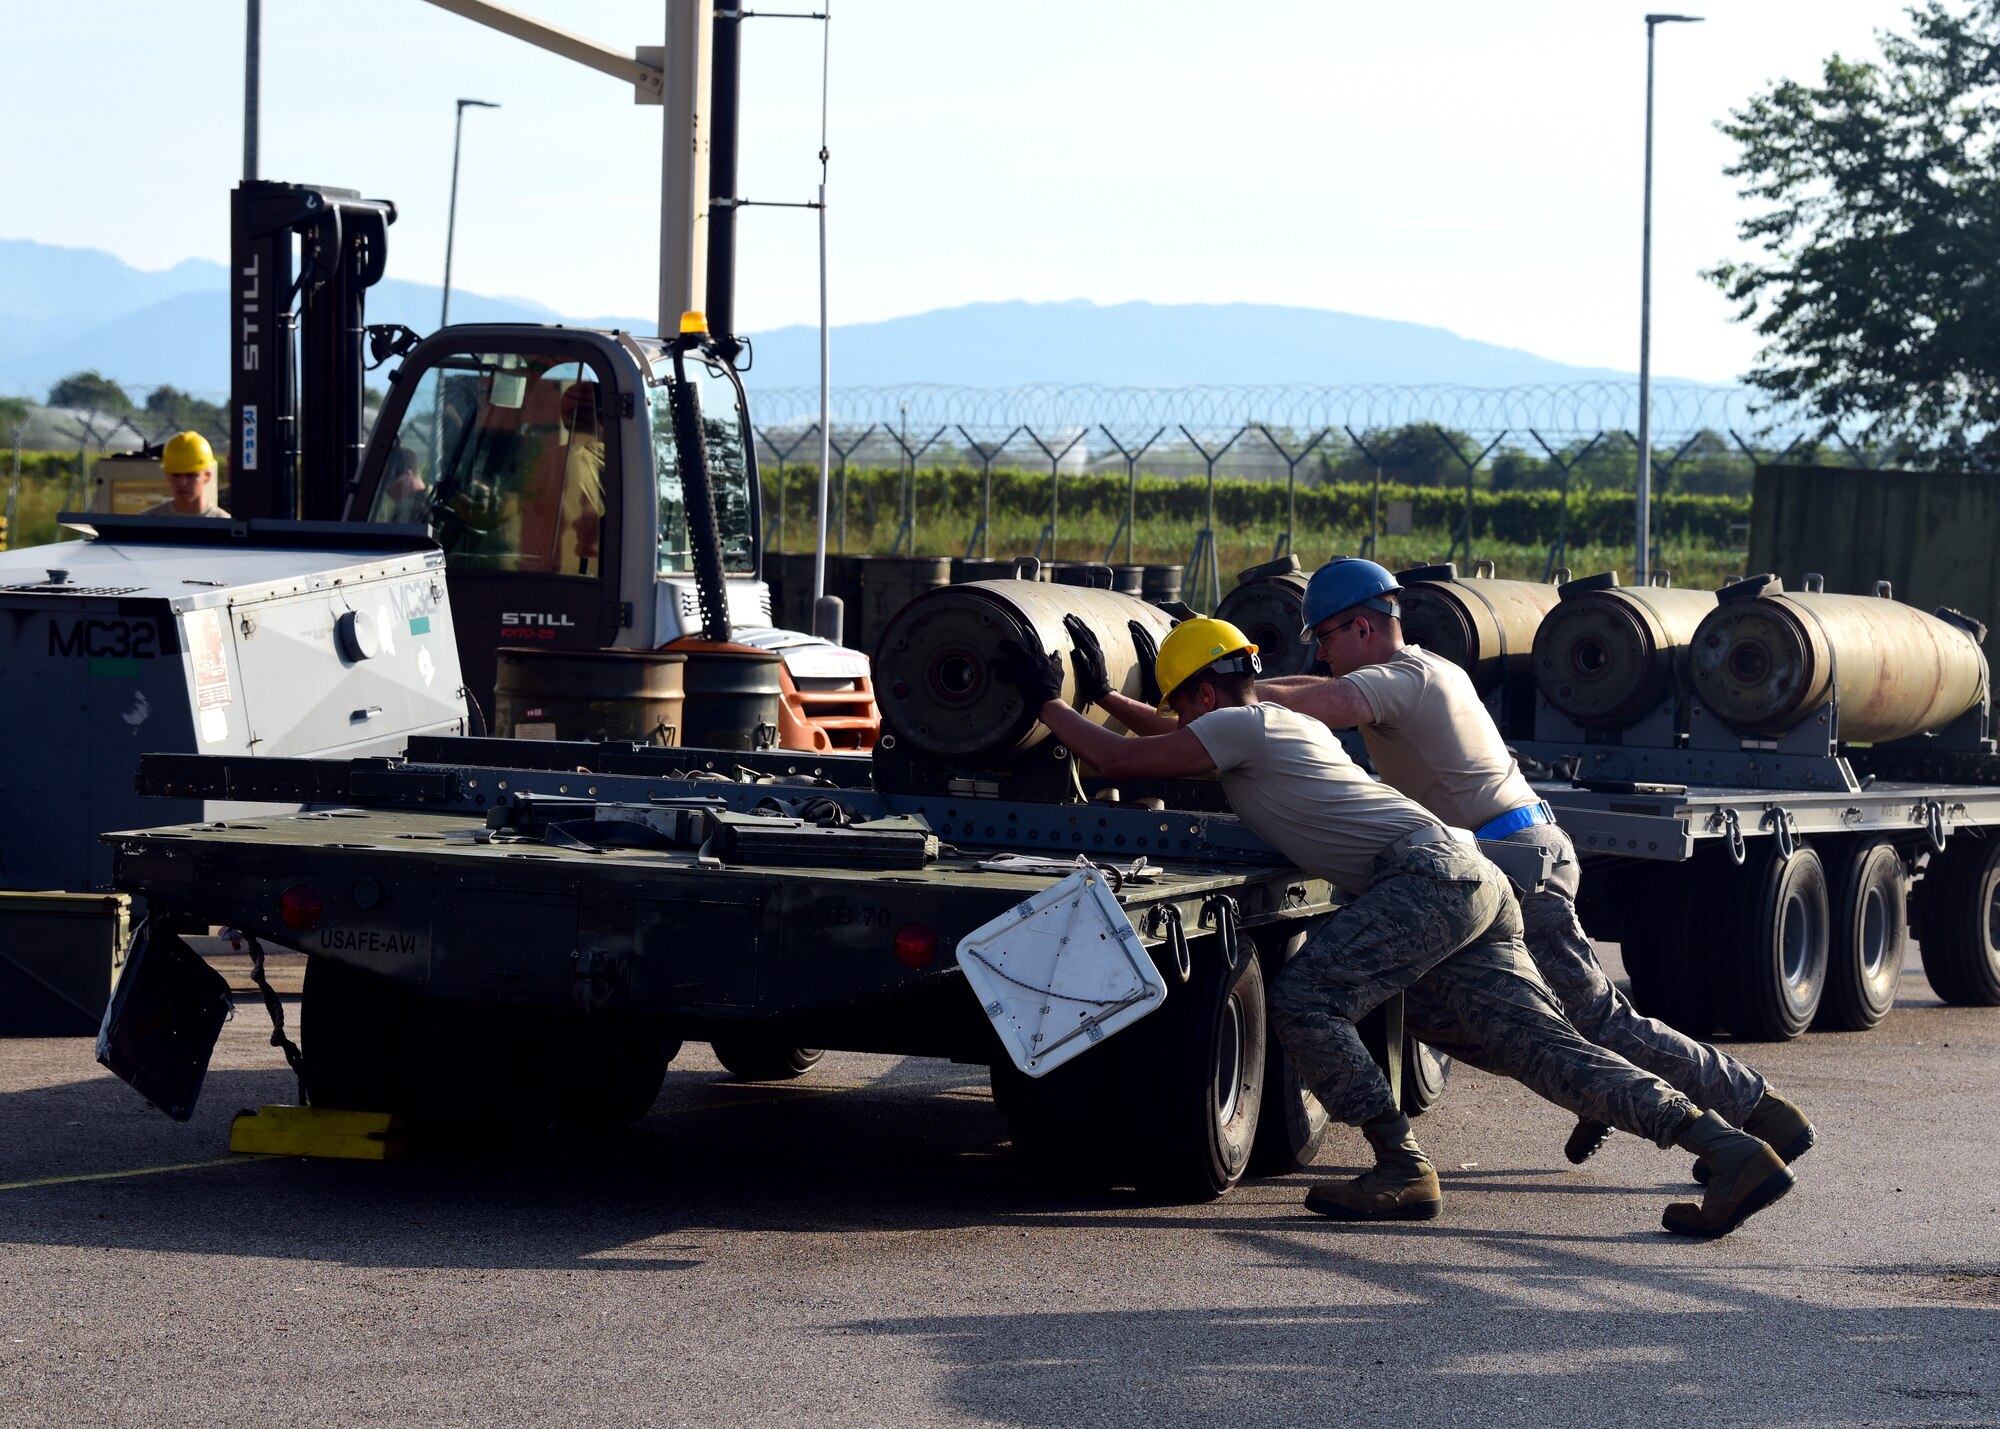 Airmen assist each other in loading munitions onto a trailer during Combat Ammunition Production Exercise 2019 on Aug. 7, 2019, at Aviano Air Base, Italy. Exercises such as CAPEX keep the Airmen of the munitions career field prepared and demonstrates USAFE’s ability to be rapidly ready for contingency operations. (U.S. Air Force photo by Airman 1st Class Caleb House)